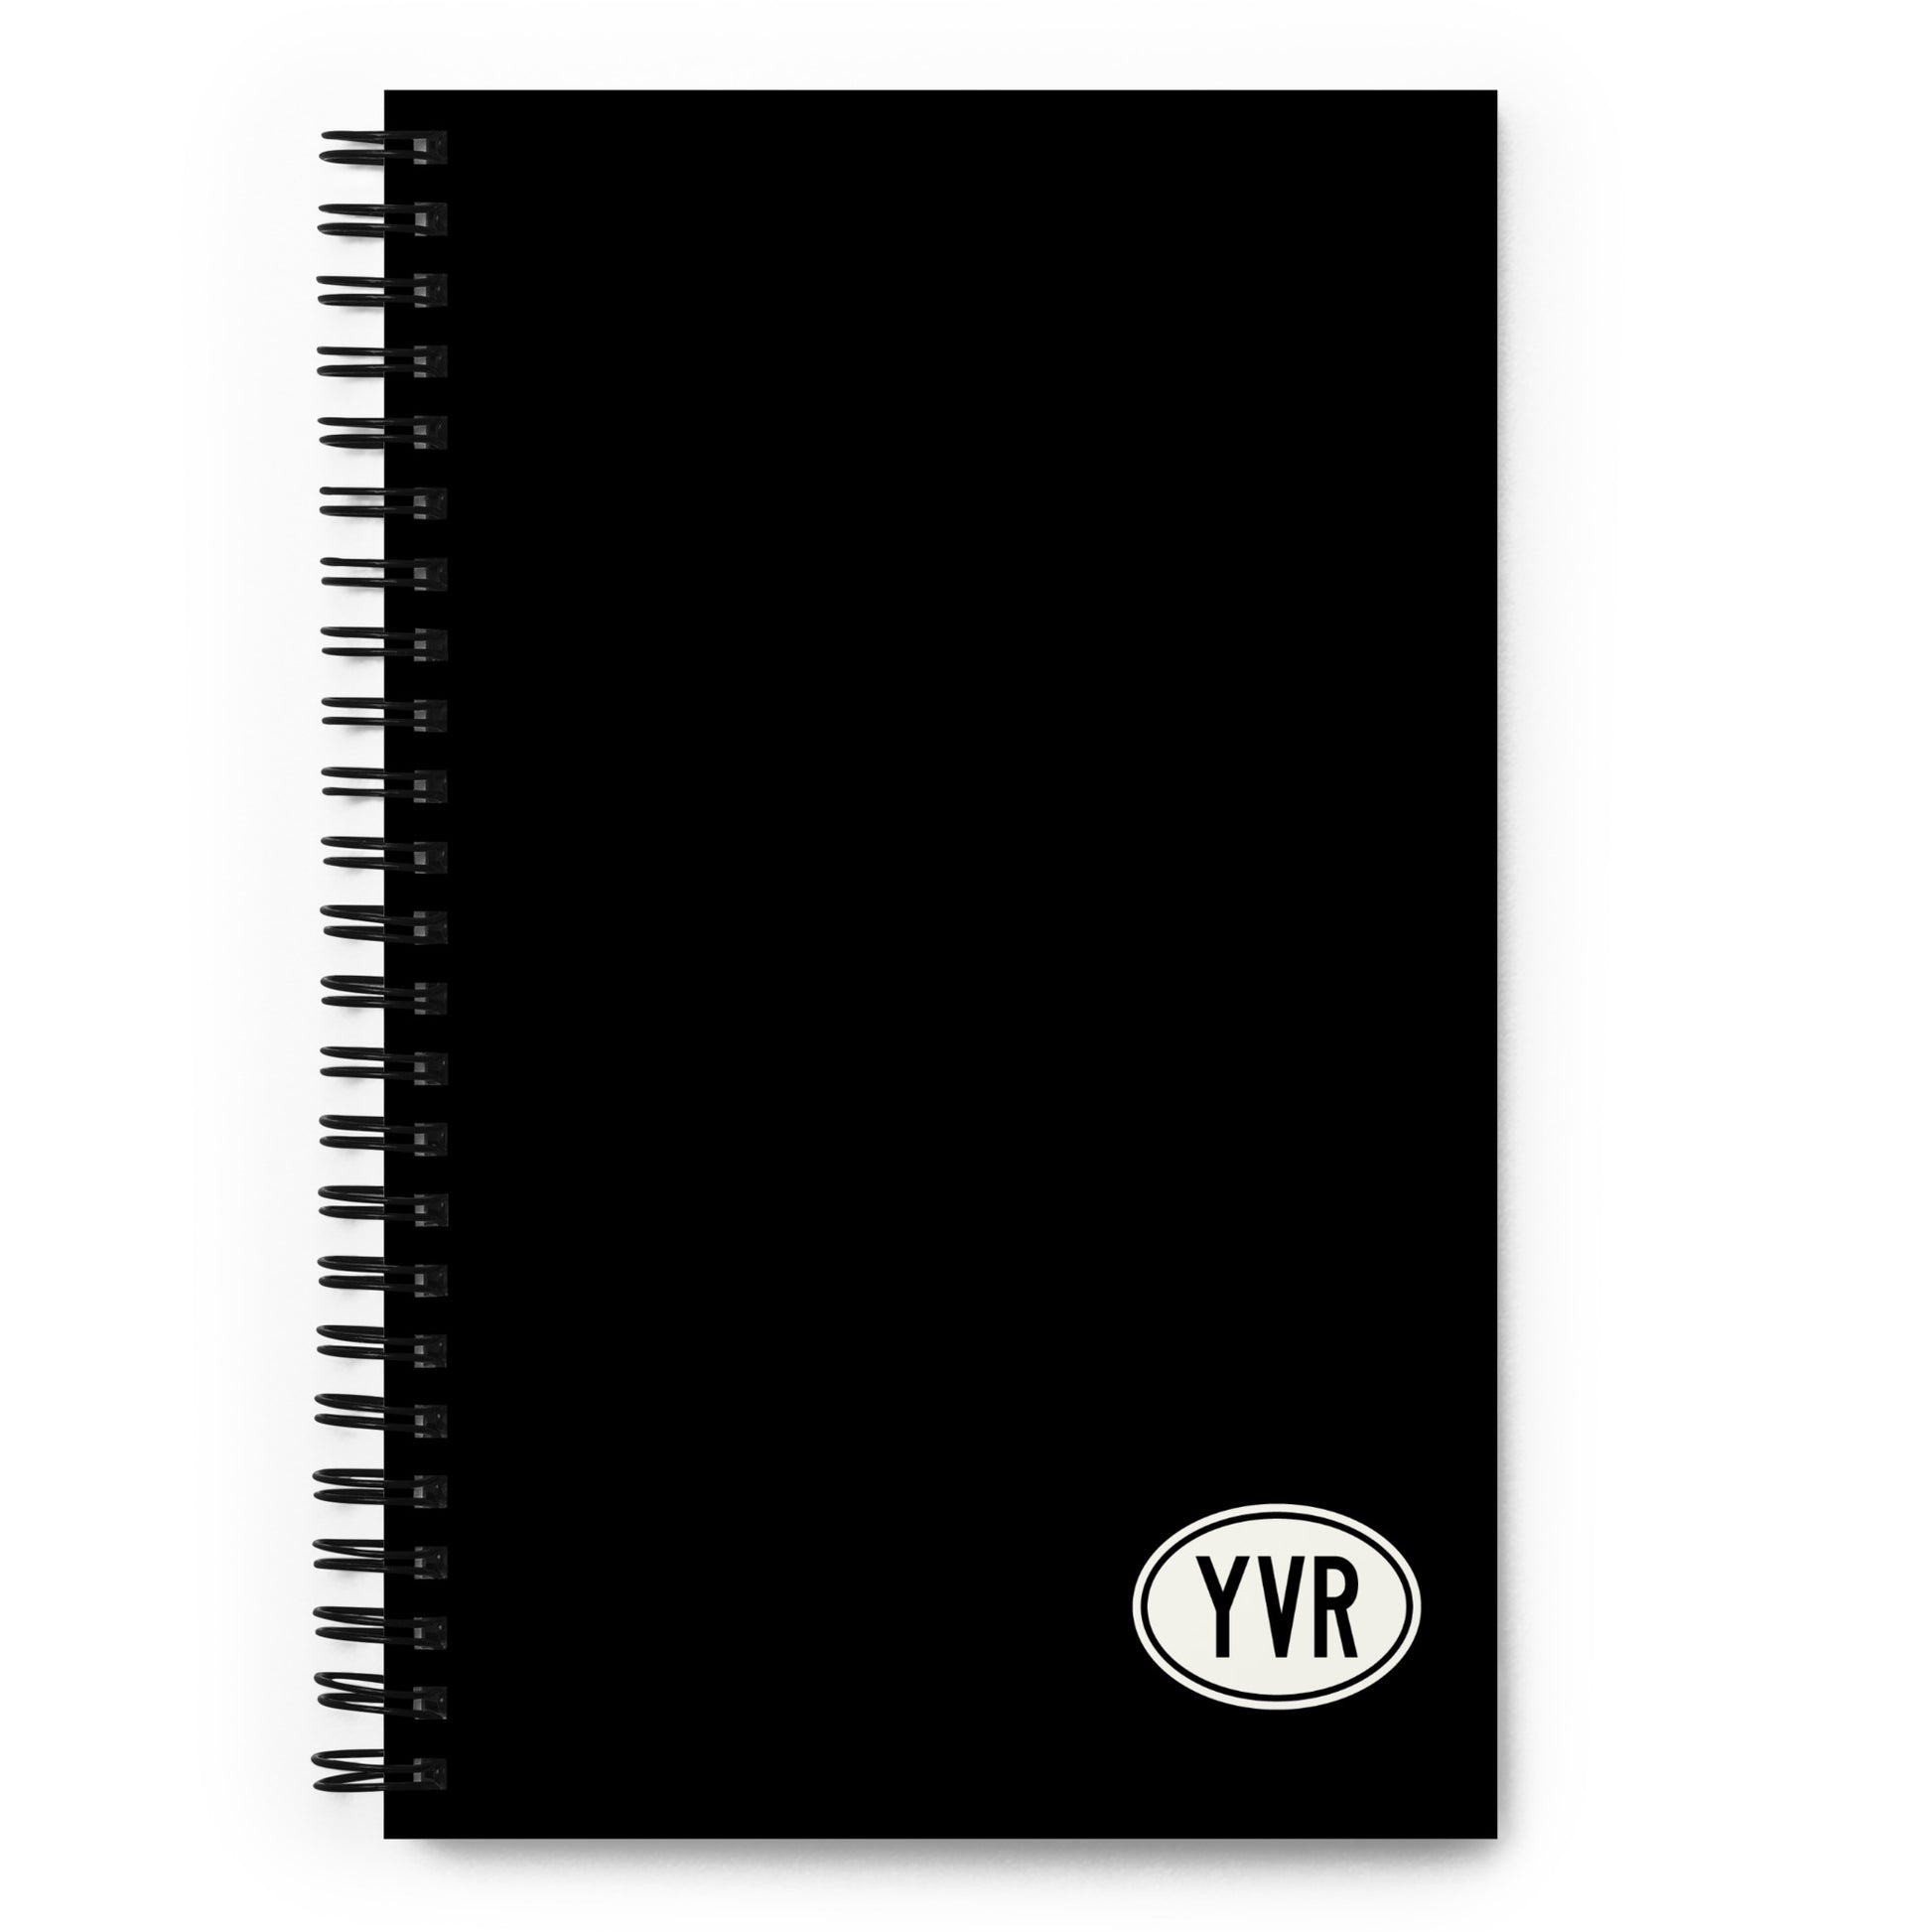 Unique Travel Gift Spiral Notebook - White Oval • YVR Vancouver • YHM Designs - Image 01